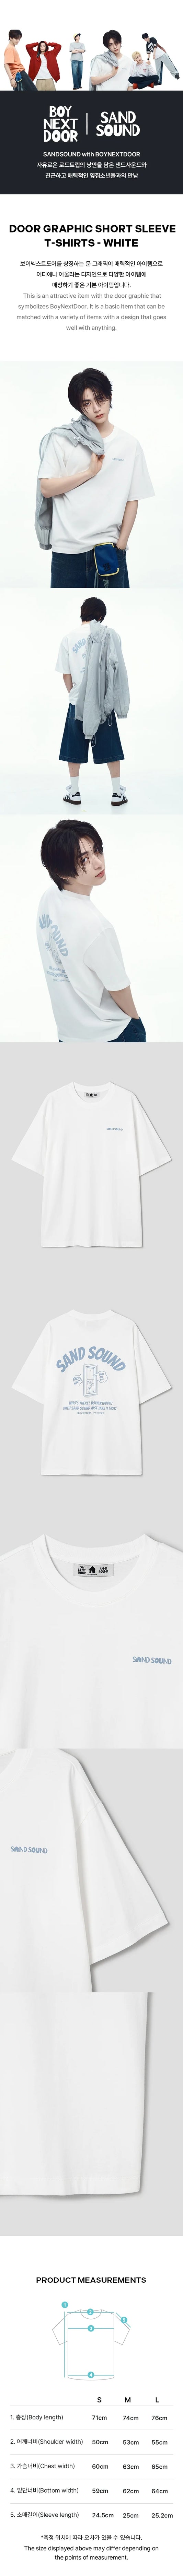 BOYNEXTDOOR - SAND SOUND CAPSULE COLLECTION OFFICIAL MD DOOR GRAPIC SHORT SLEEVE T SHIRTS WHITE